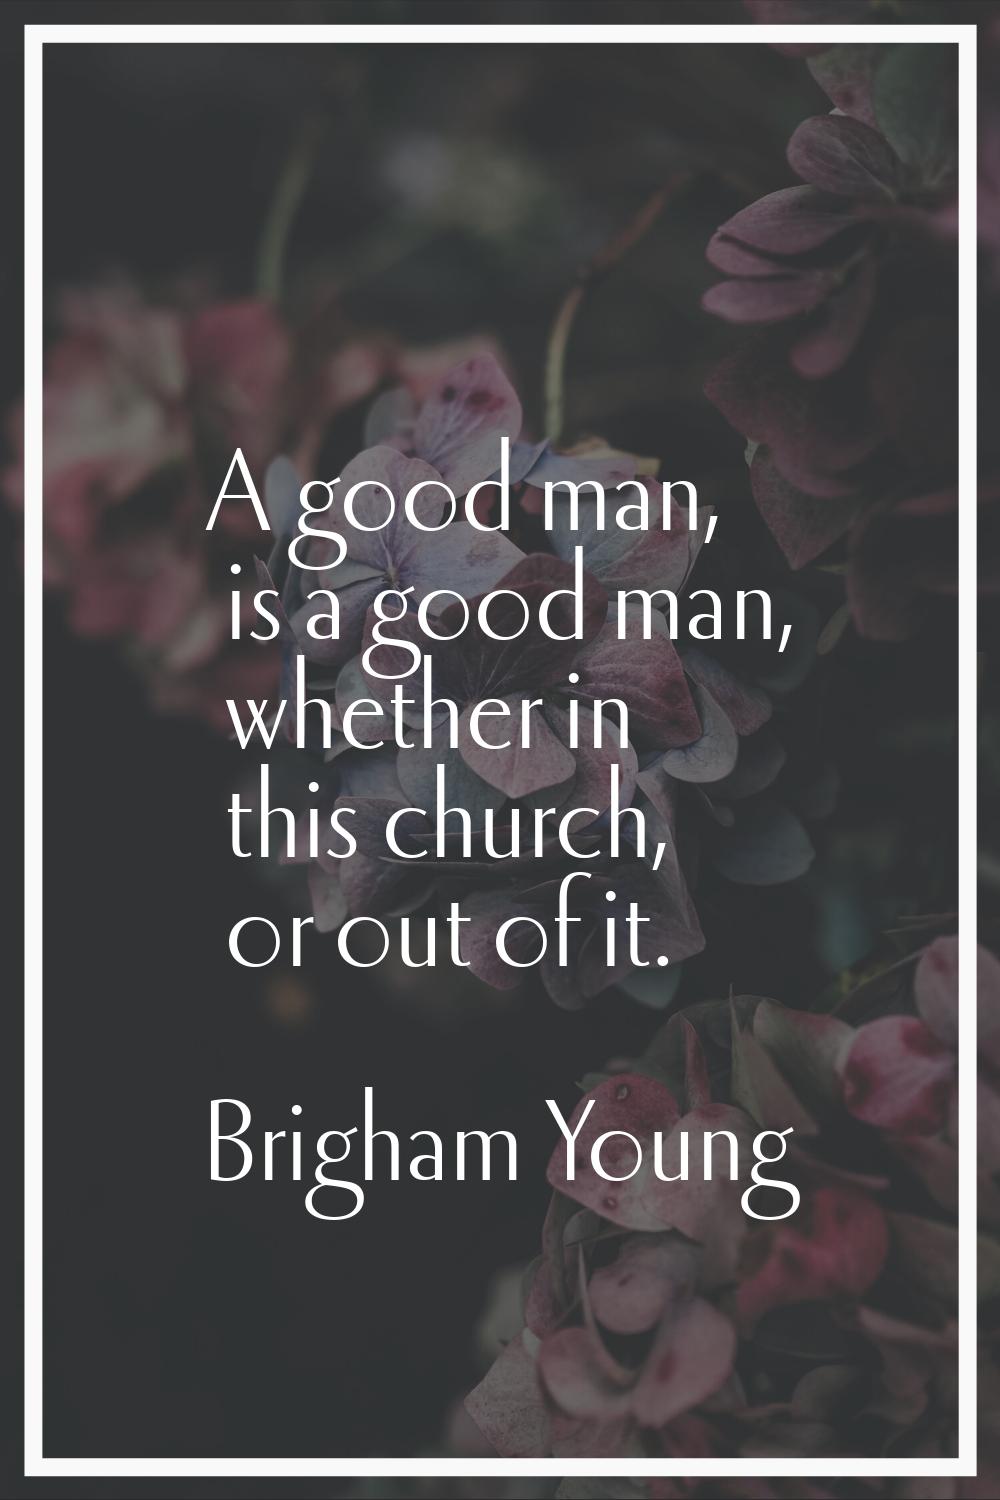 A good man, is a good man, whether in this church, or out of it.